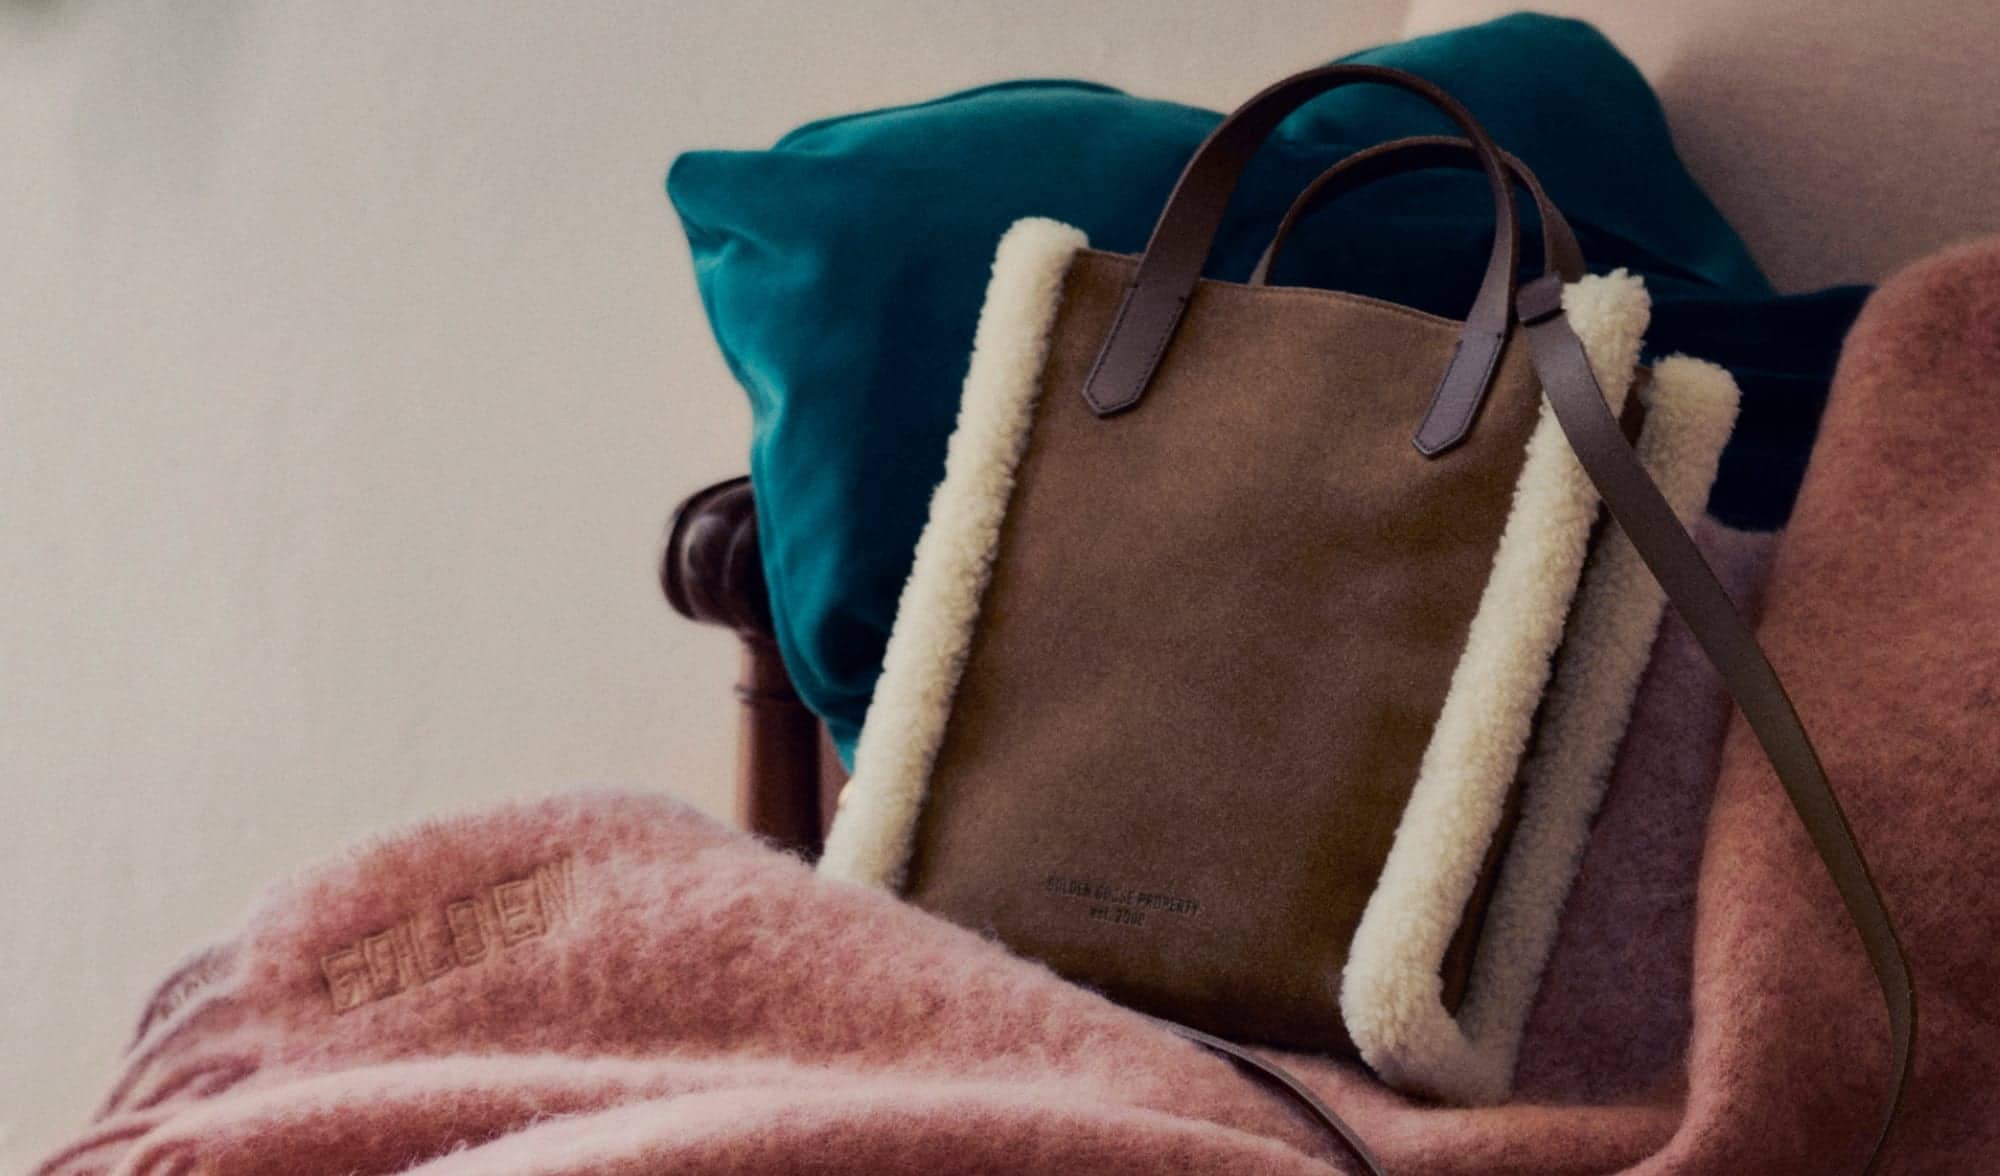 brown-California-bag-mini-with-white-shearling-trim-features-on-pink-scarf-and-blue-cushion